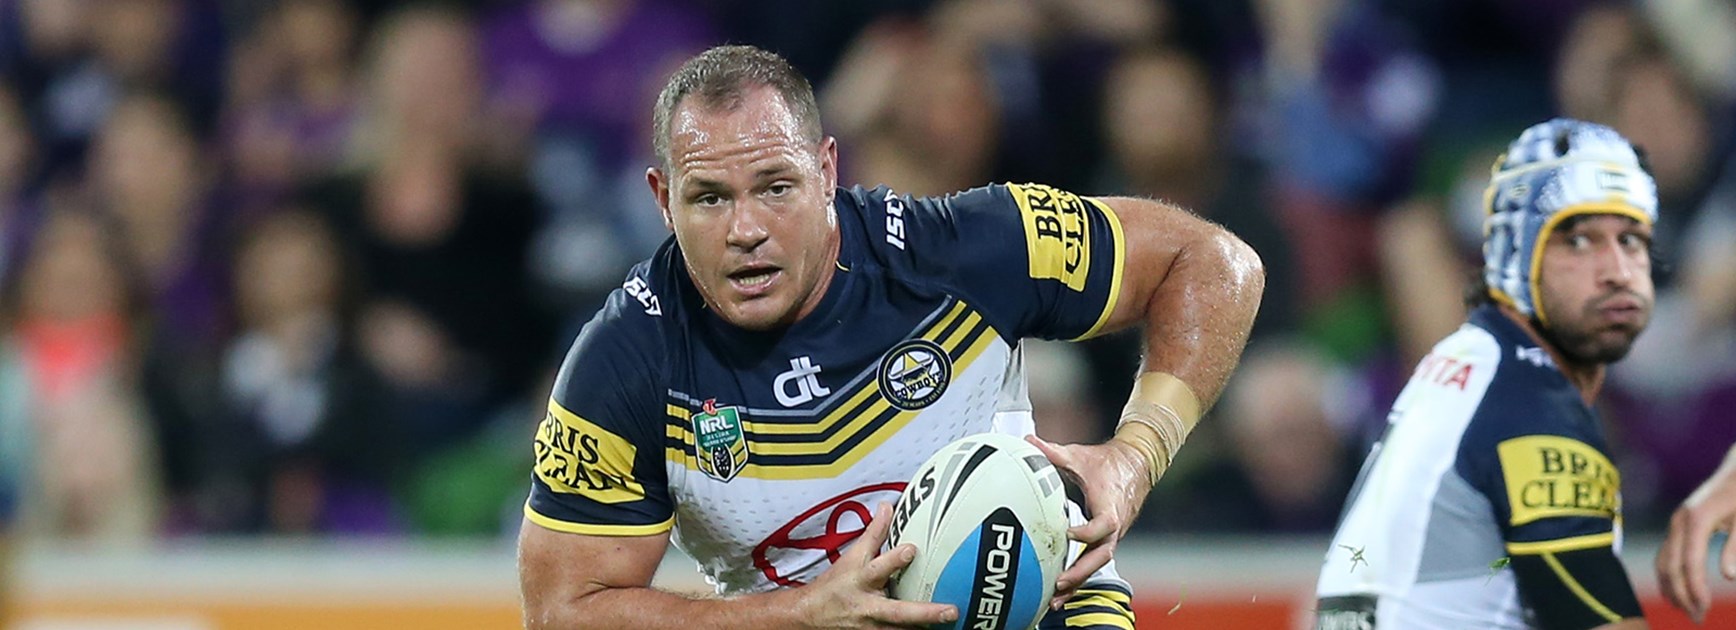 North Queensland prop Matt Scott played a big role in the Cowboys' Preliminary Final win over the Storm.